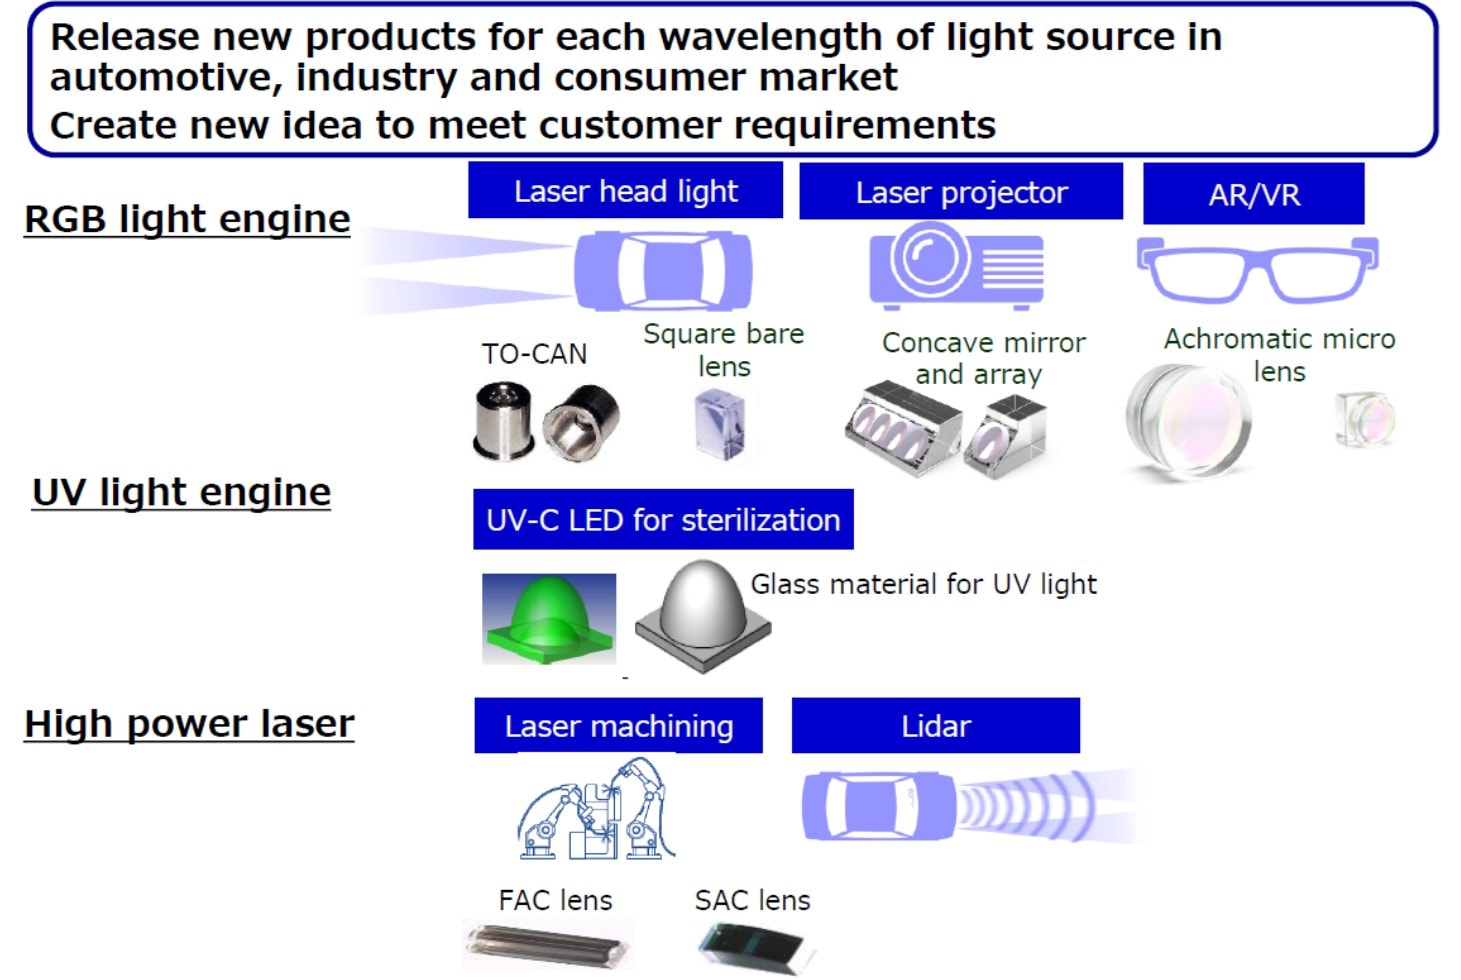 Release new products for each wavelength of light source in automotive, industry and consumer market Create new idea to meet customer requirements